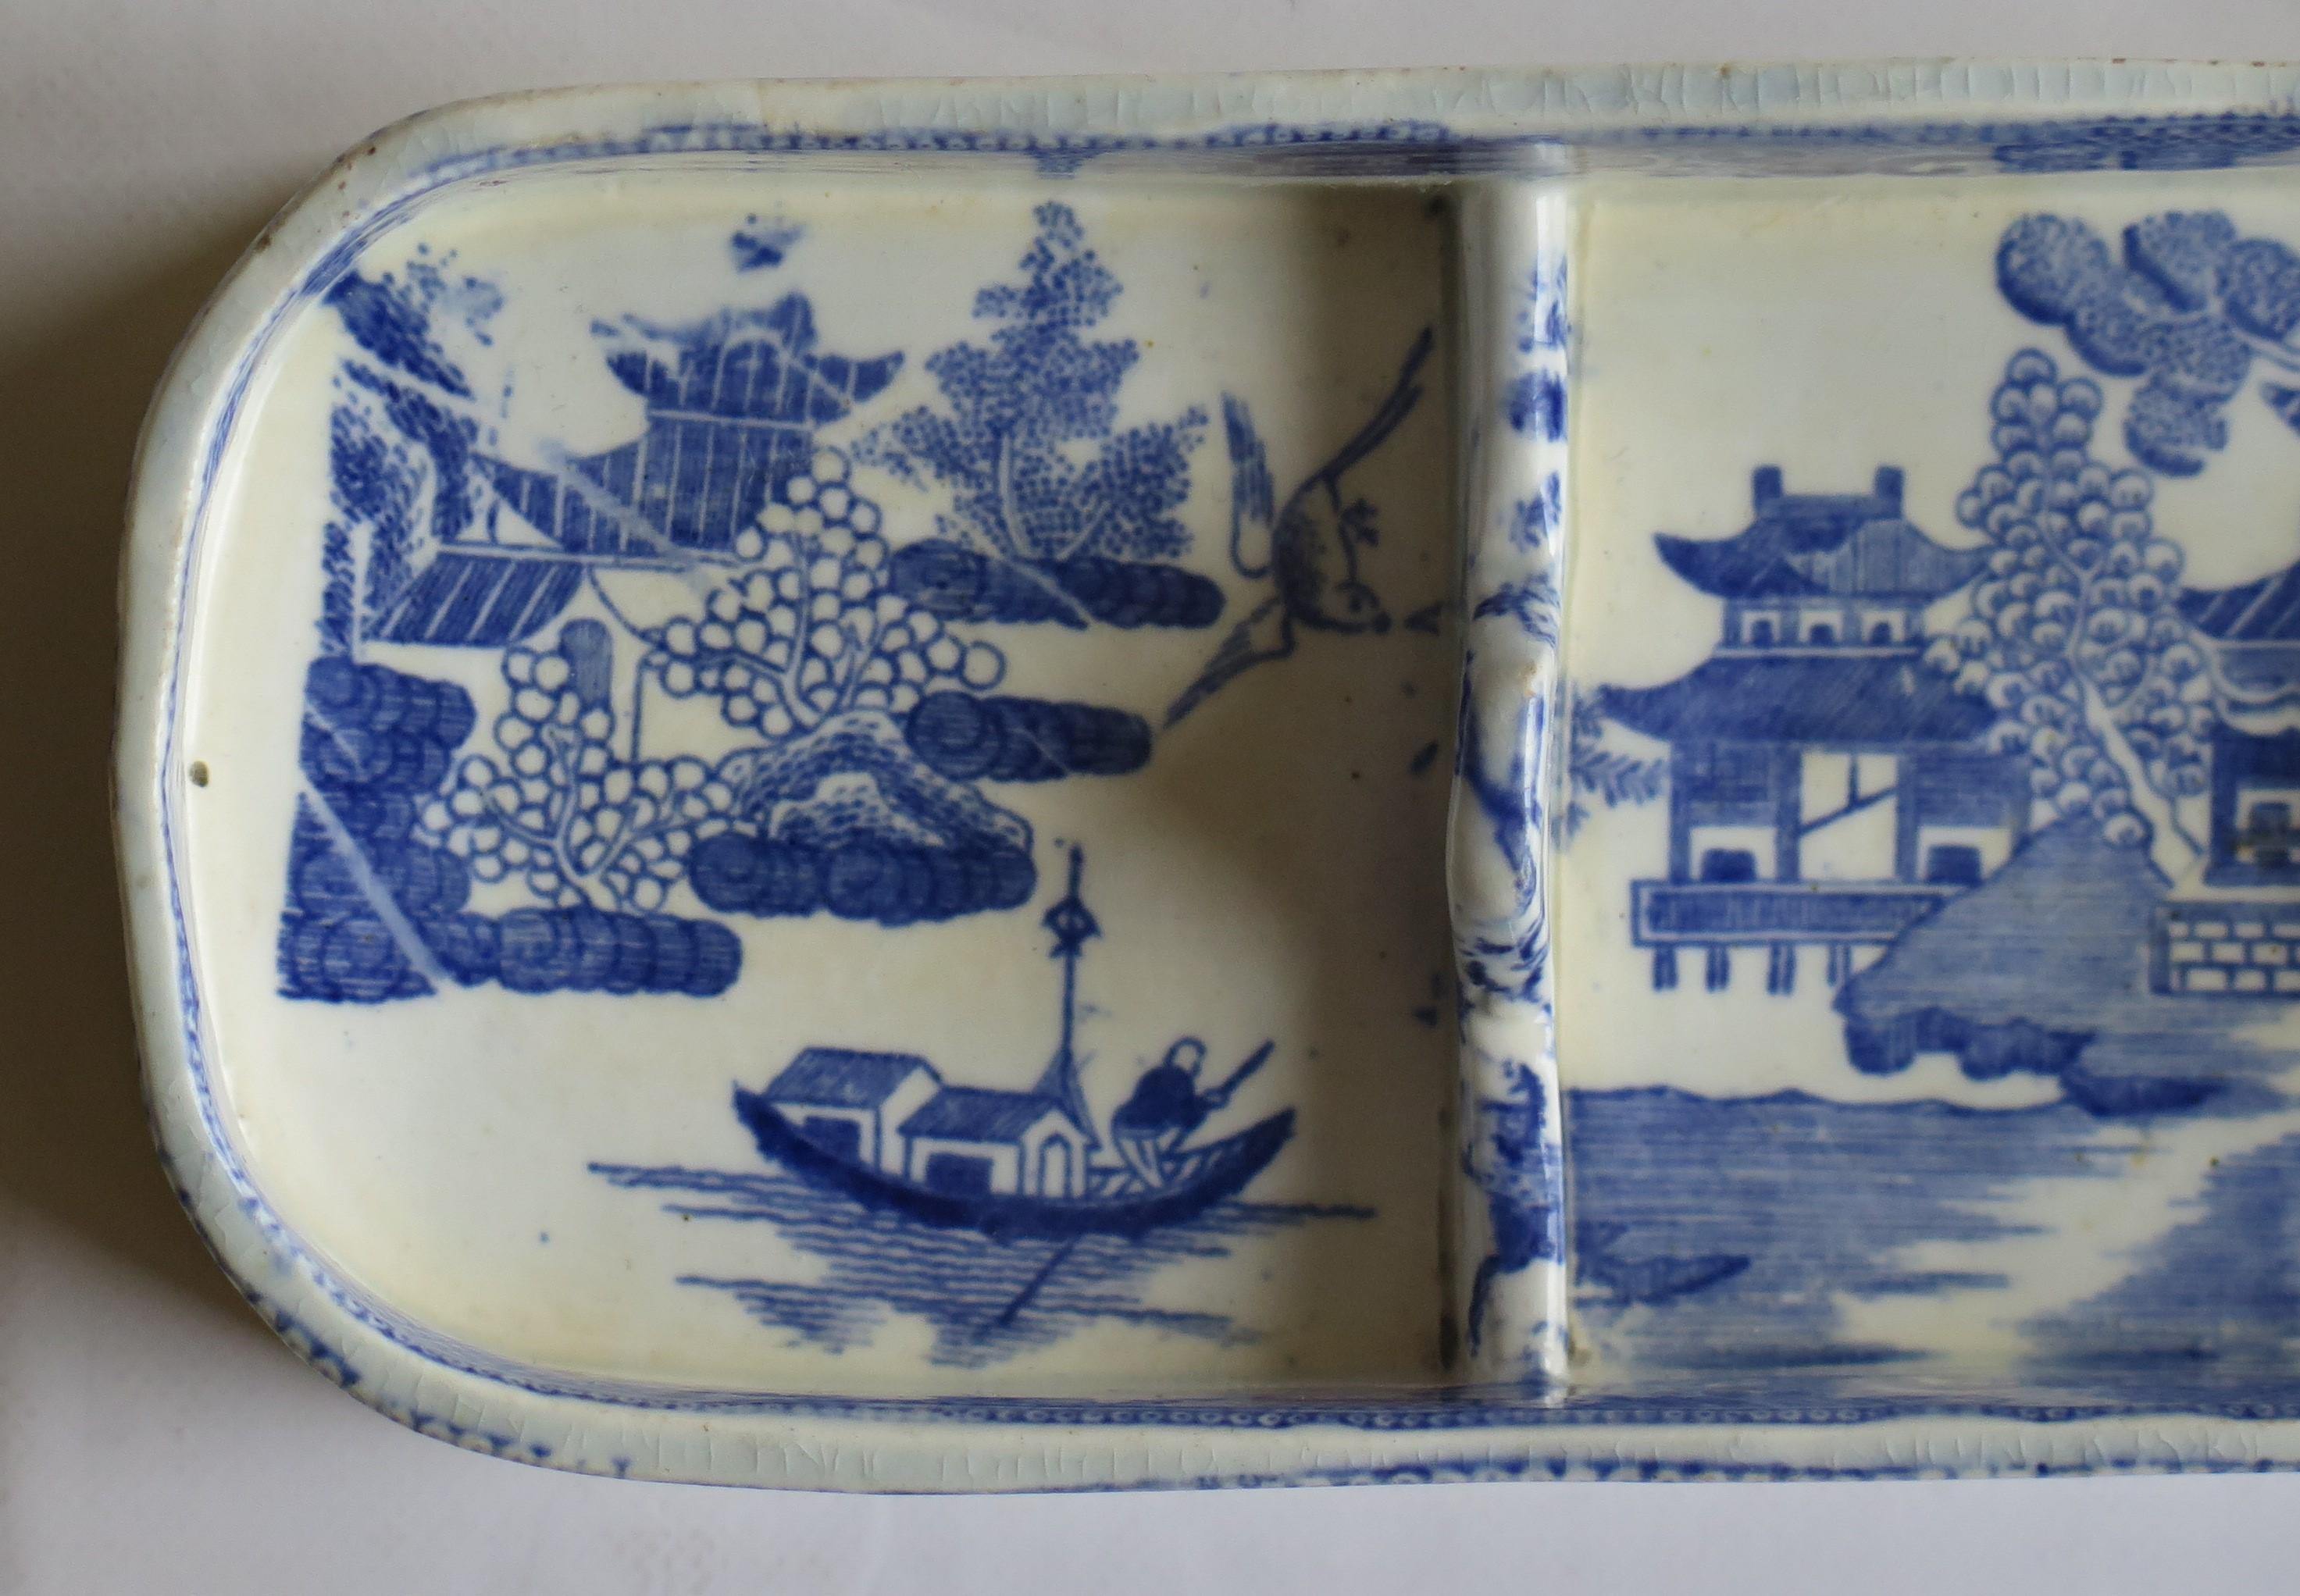 Earthenware Rare Early Spode Pen Tray Pearlware Blue and White Willow Pattern, circa 1800